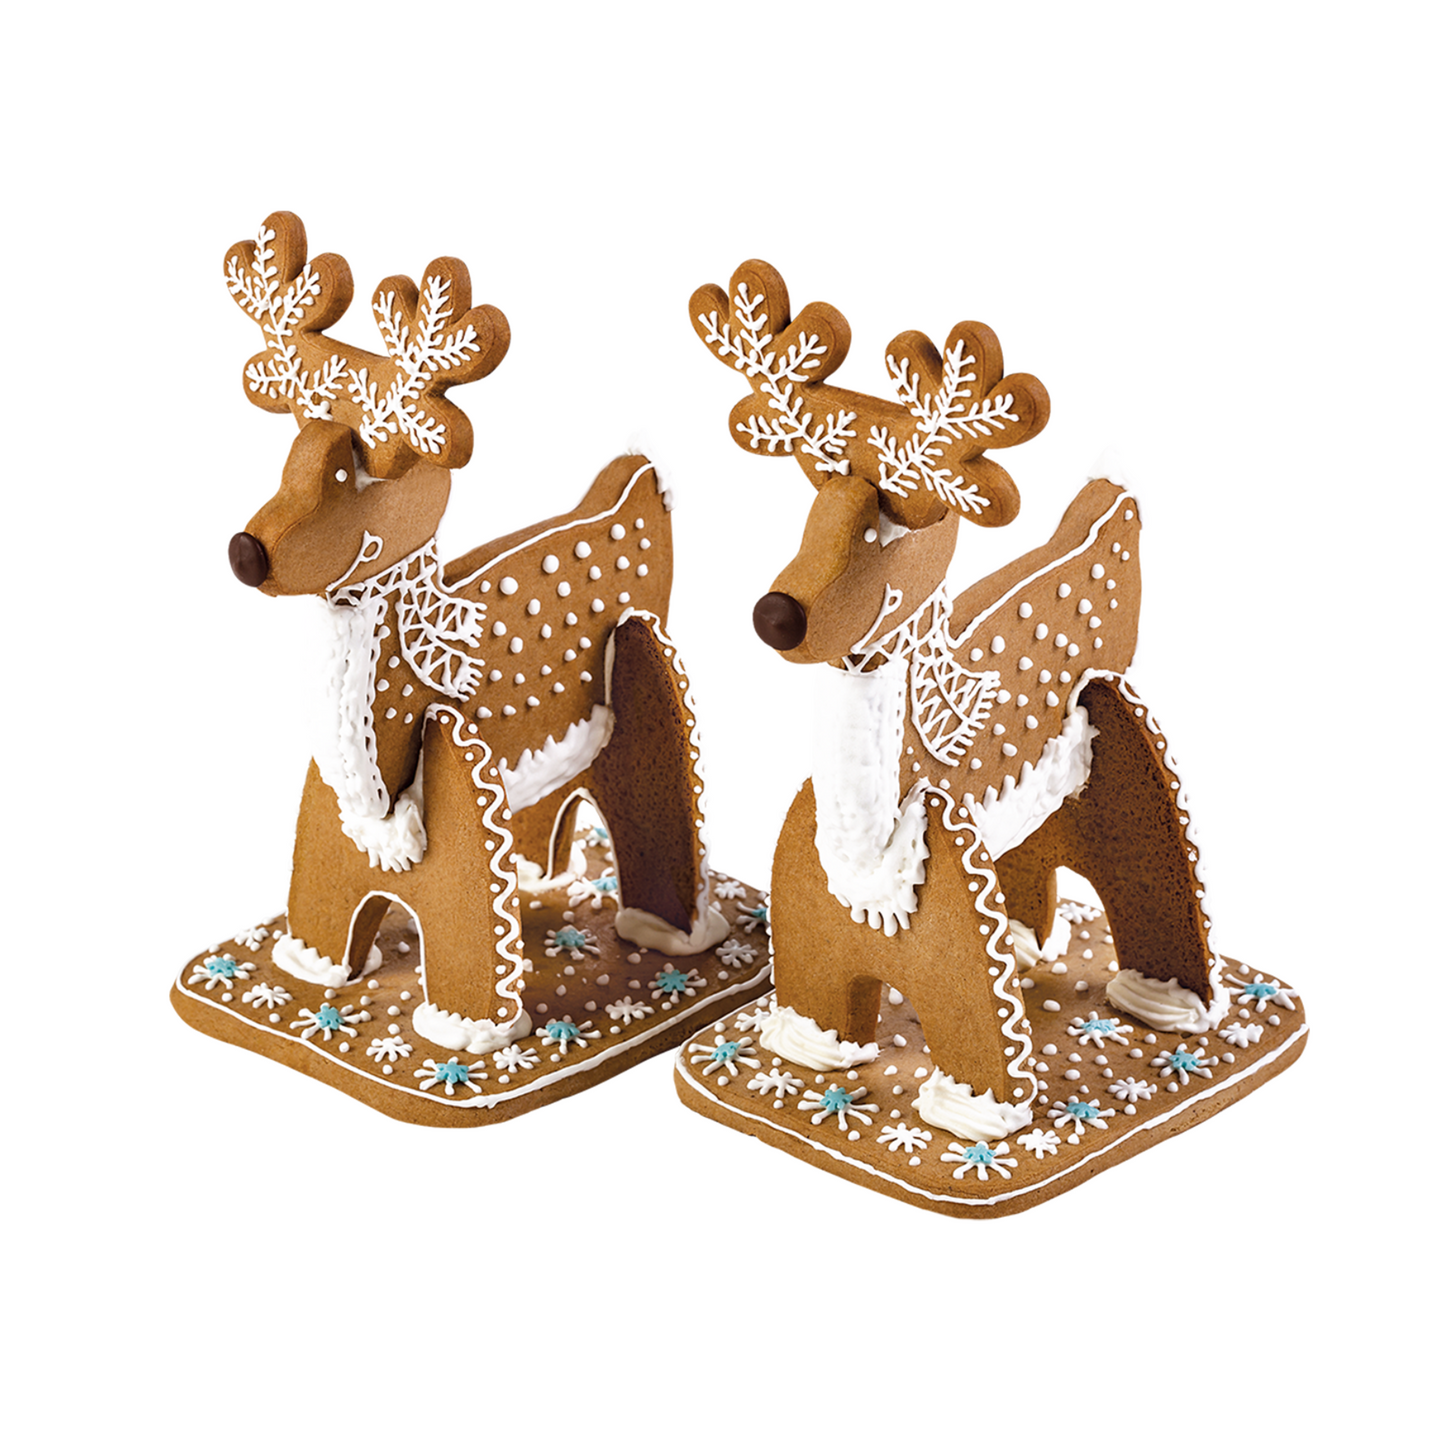 Make Your Own Gingerbread Reindeer